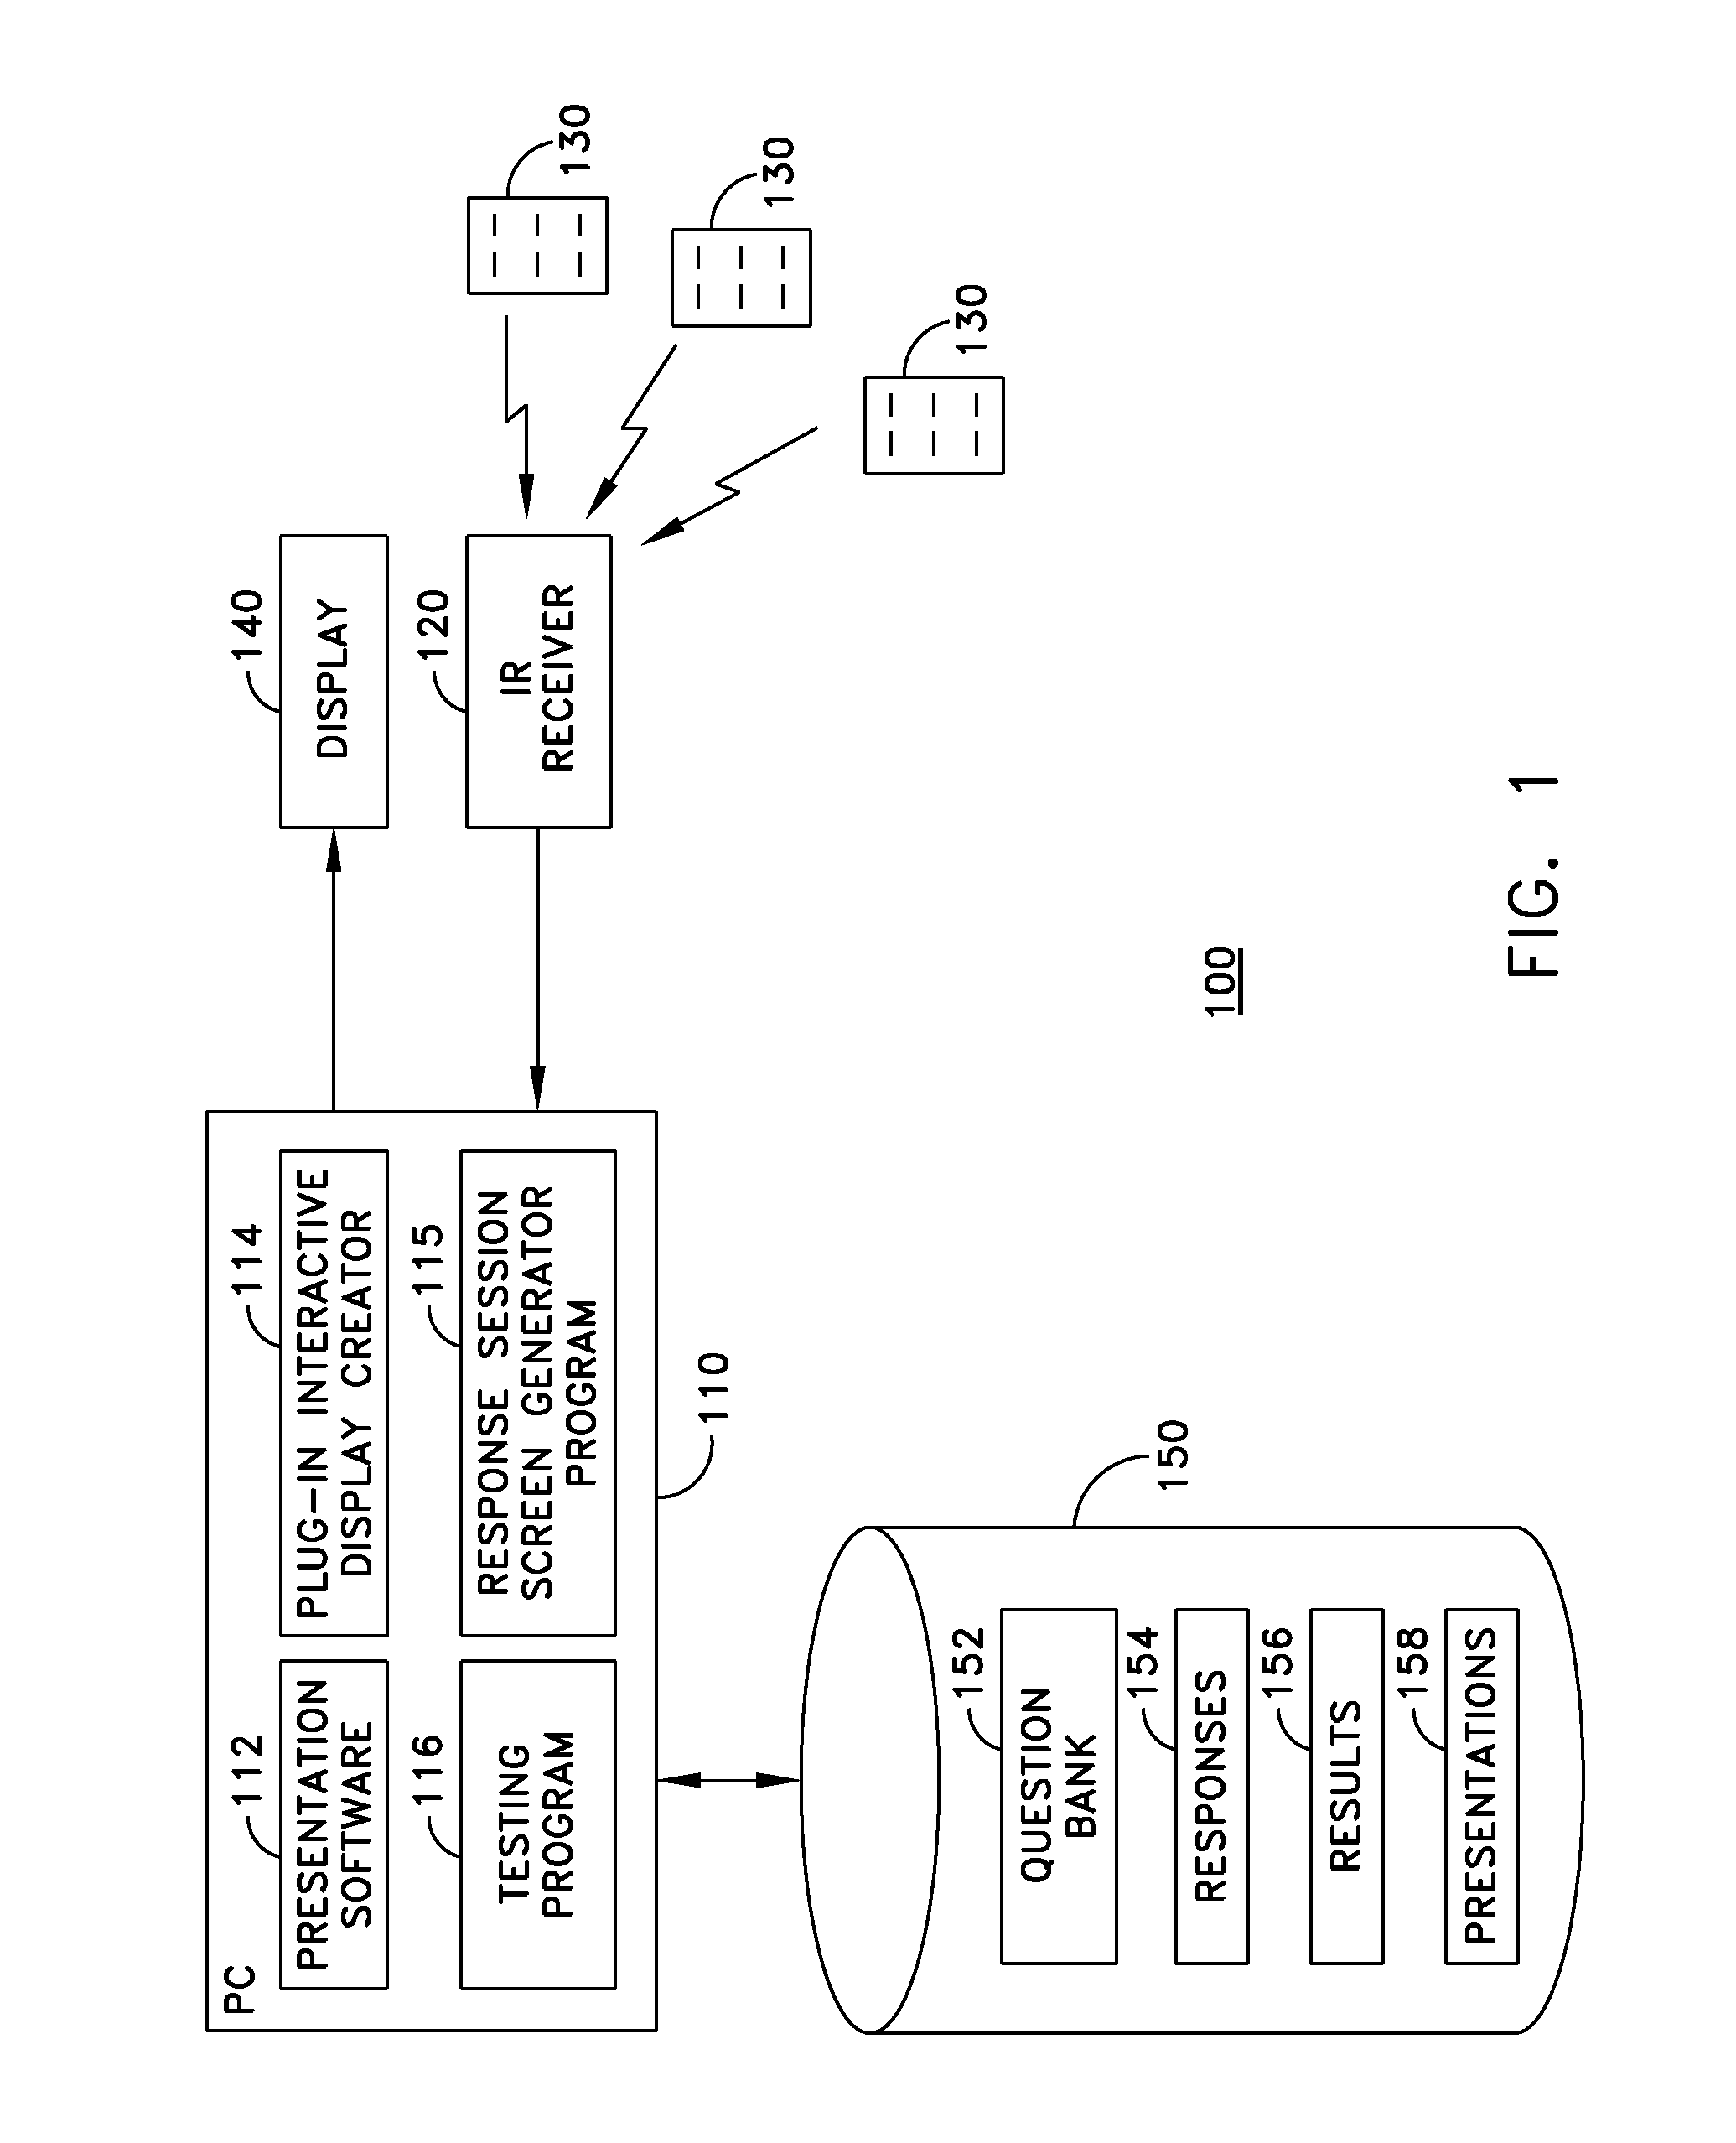 Interactive presentation system and method